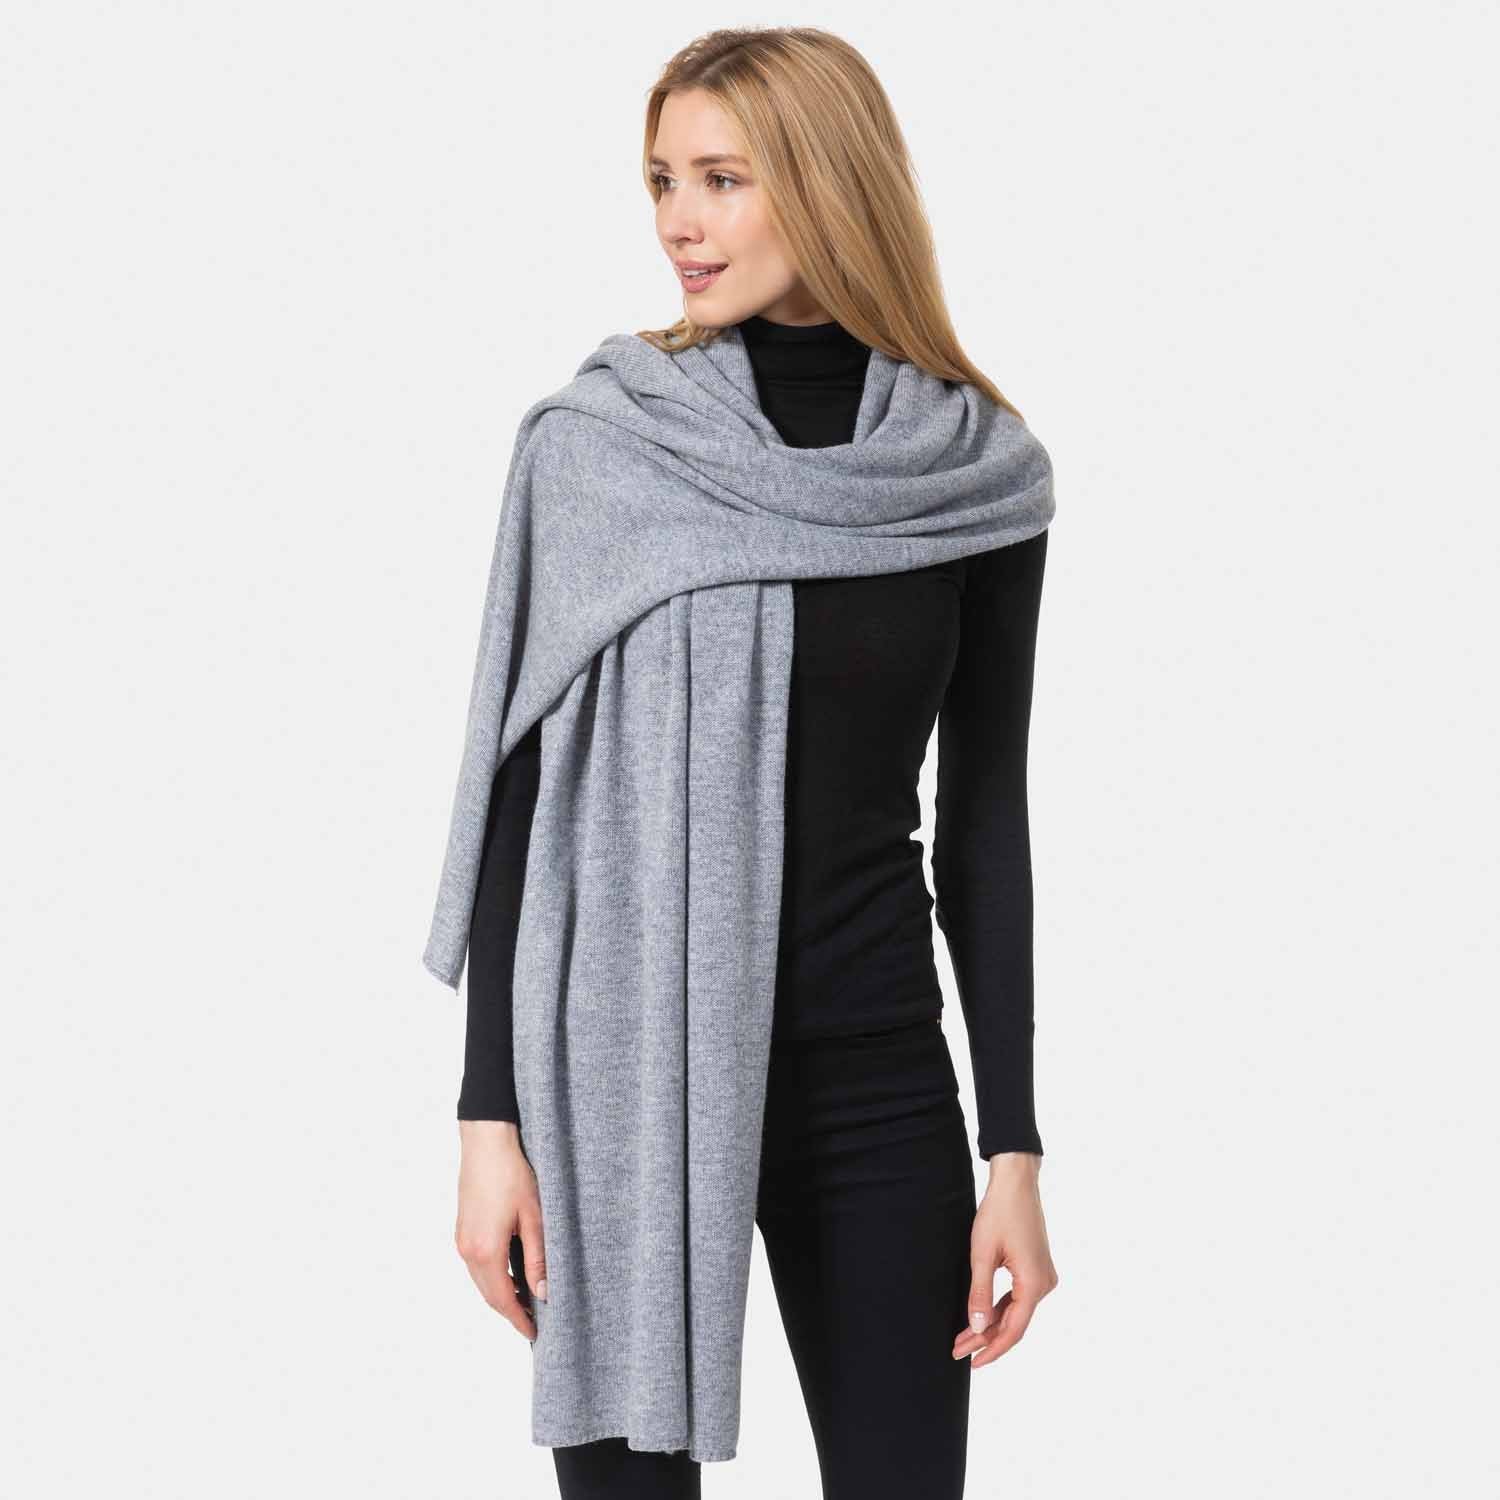 Picture of a woman wearing a grey cashmere jersey knitted oversize scarf or travel wrap.